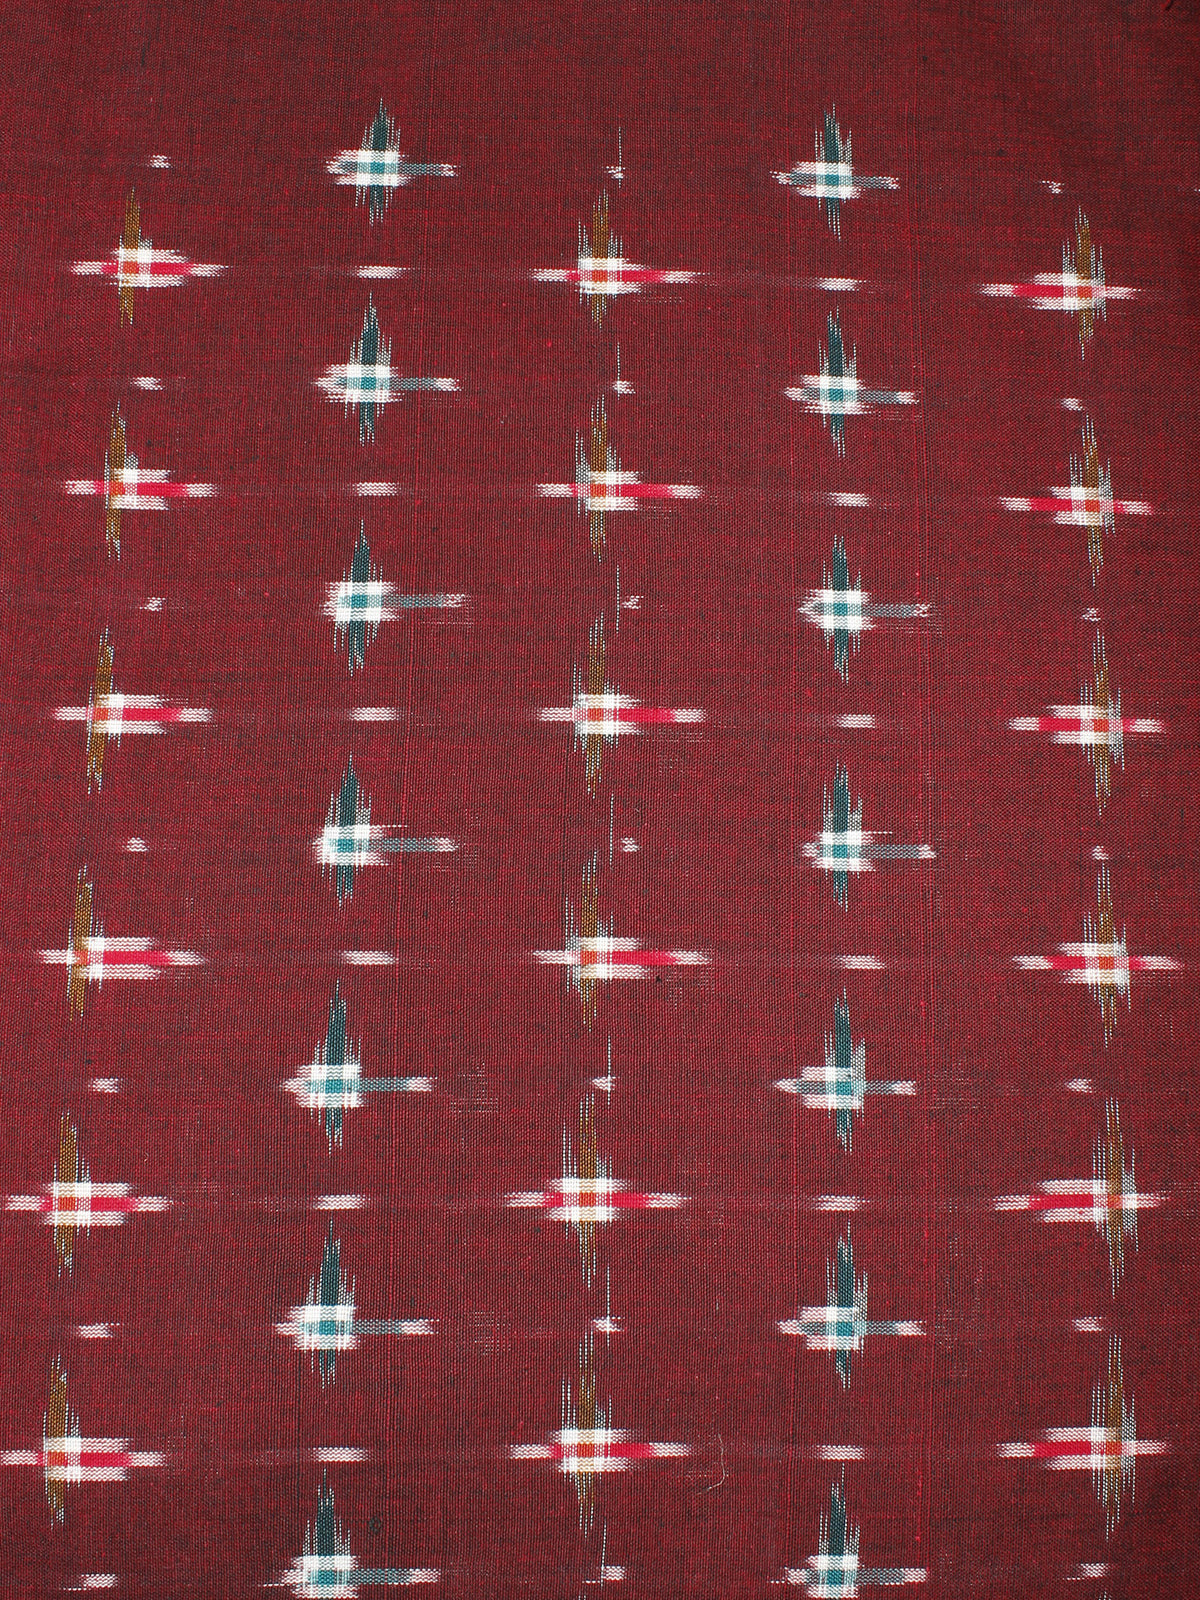 Maroon Multi Color Pochampally Hand Weaved Double Ikat Fabric Per Meter - F0916664